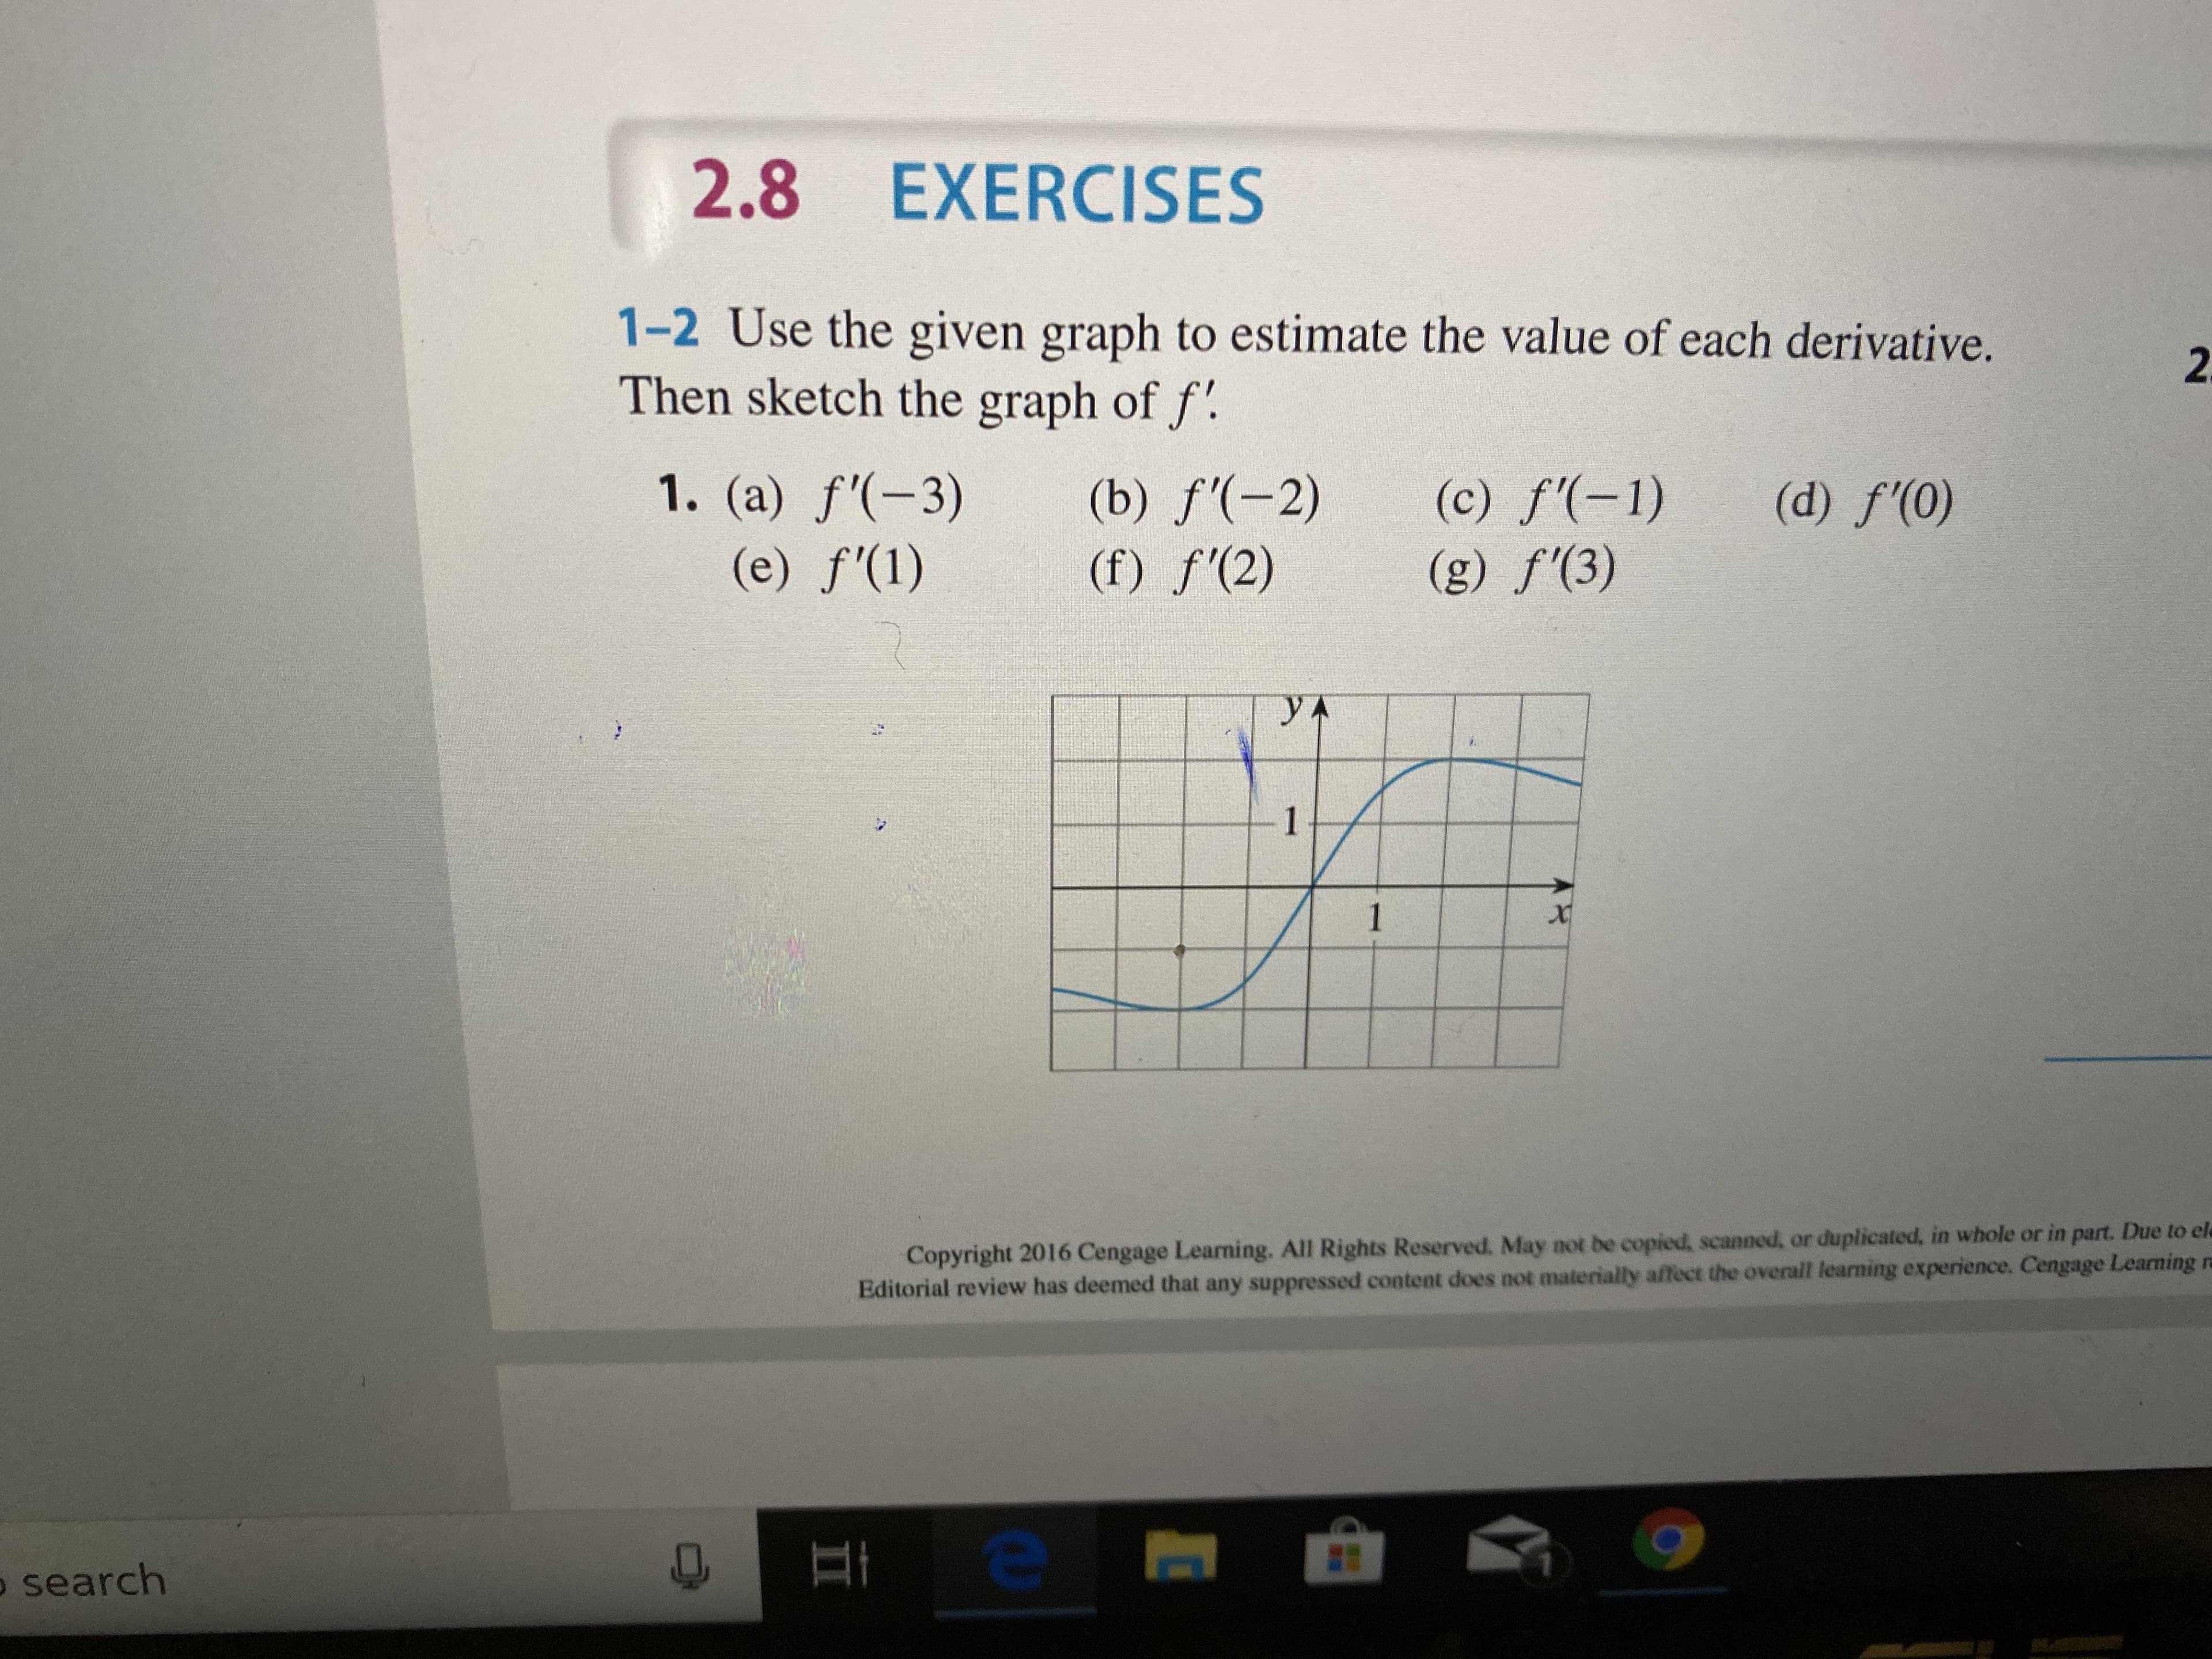 2.8 EXERCISES
1-2 Use the given graph to estimate the value of each derivative.
Then sketch the graph of f'.
2.
1. (a) f'(-3)
(c) f'(-1)
(g) f'(3)
(b) f'(-2)
(f) f'(2)
(d) f'(0)
(e) f'(1)
yA
1
1
Copyright 2016 Cengage Learming. All Rights Reserved. May not be copied, scanned, or duplicated, in whole or in part. Due to ele
Editorial review has deemed that any suppressed content does not materially affect the overall learning experience. Cengage Learning ra
o search
